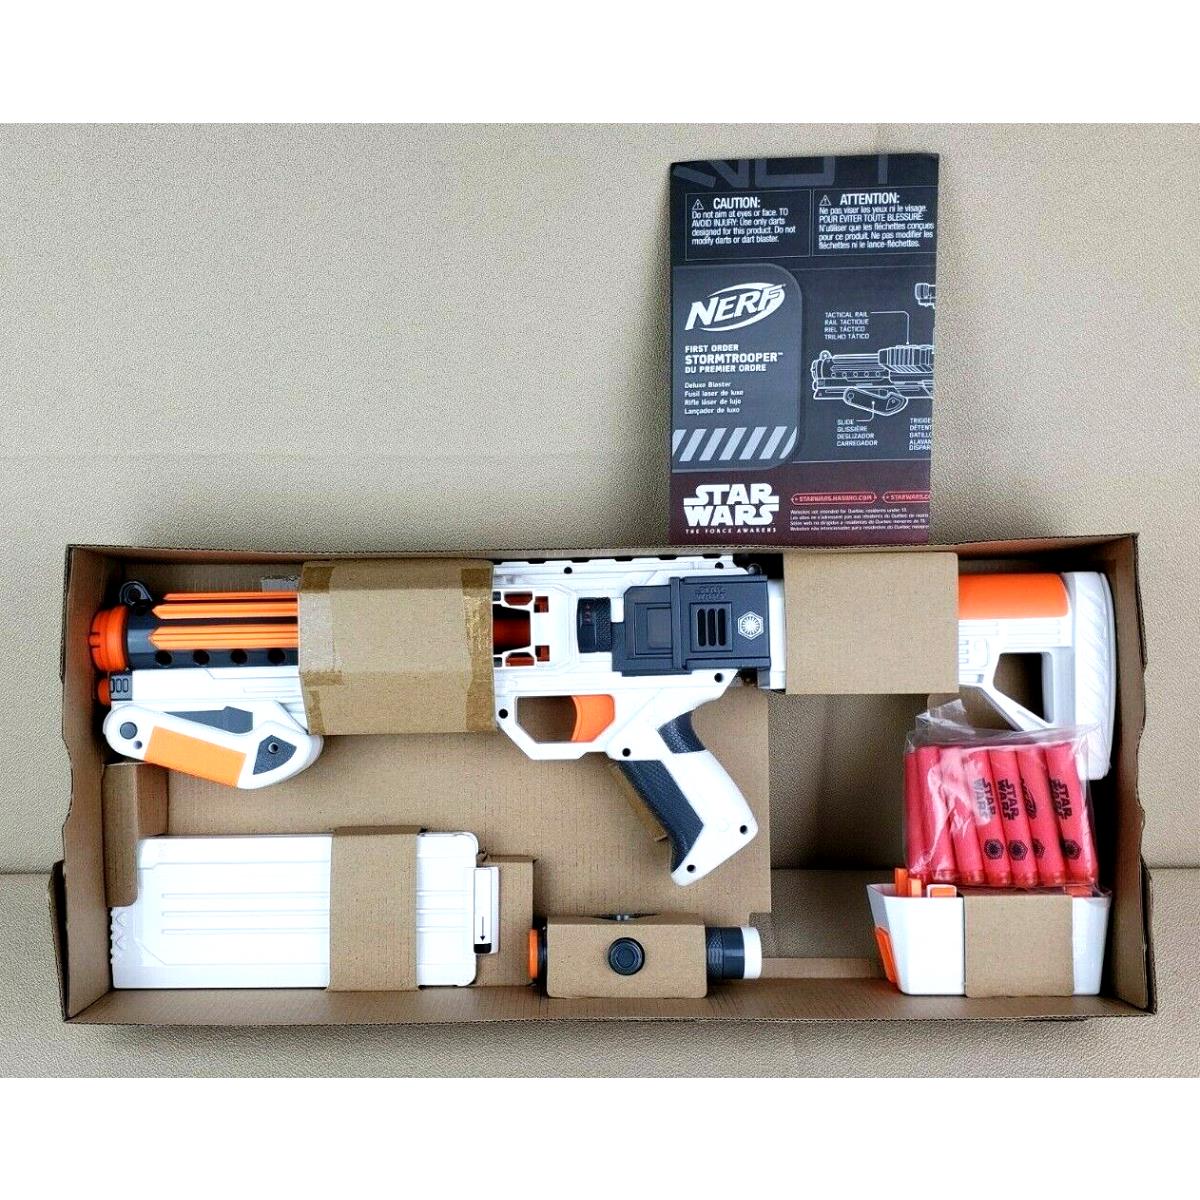 Star Wars The Force Awakens First Order Storm Trooper Nerf Gun 12 Darts Included